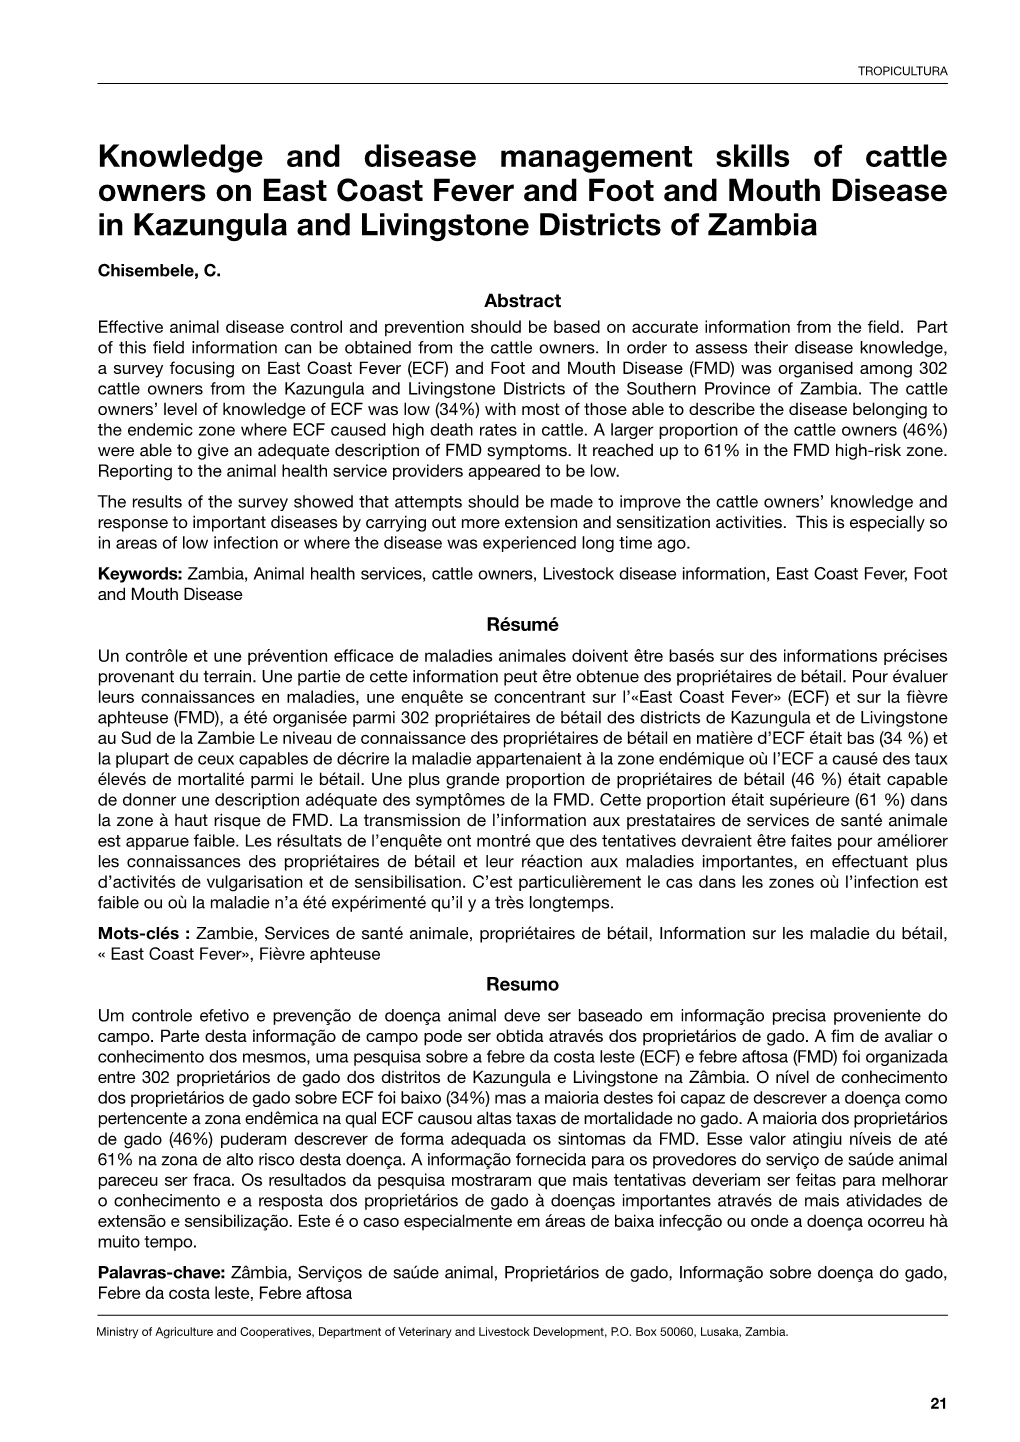 Knowledge and Disease Management Skills of Cattle Owners on East Coast Fever and Foot and Mouth Disease in Kazungula and Livingstone Districts of Zambia